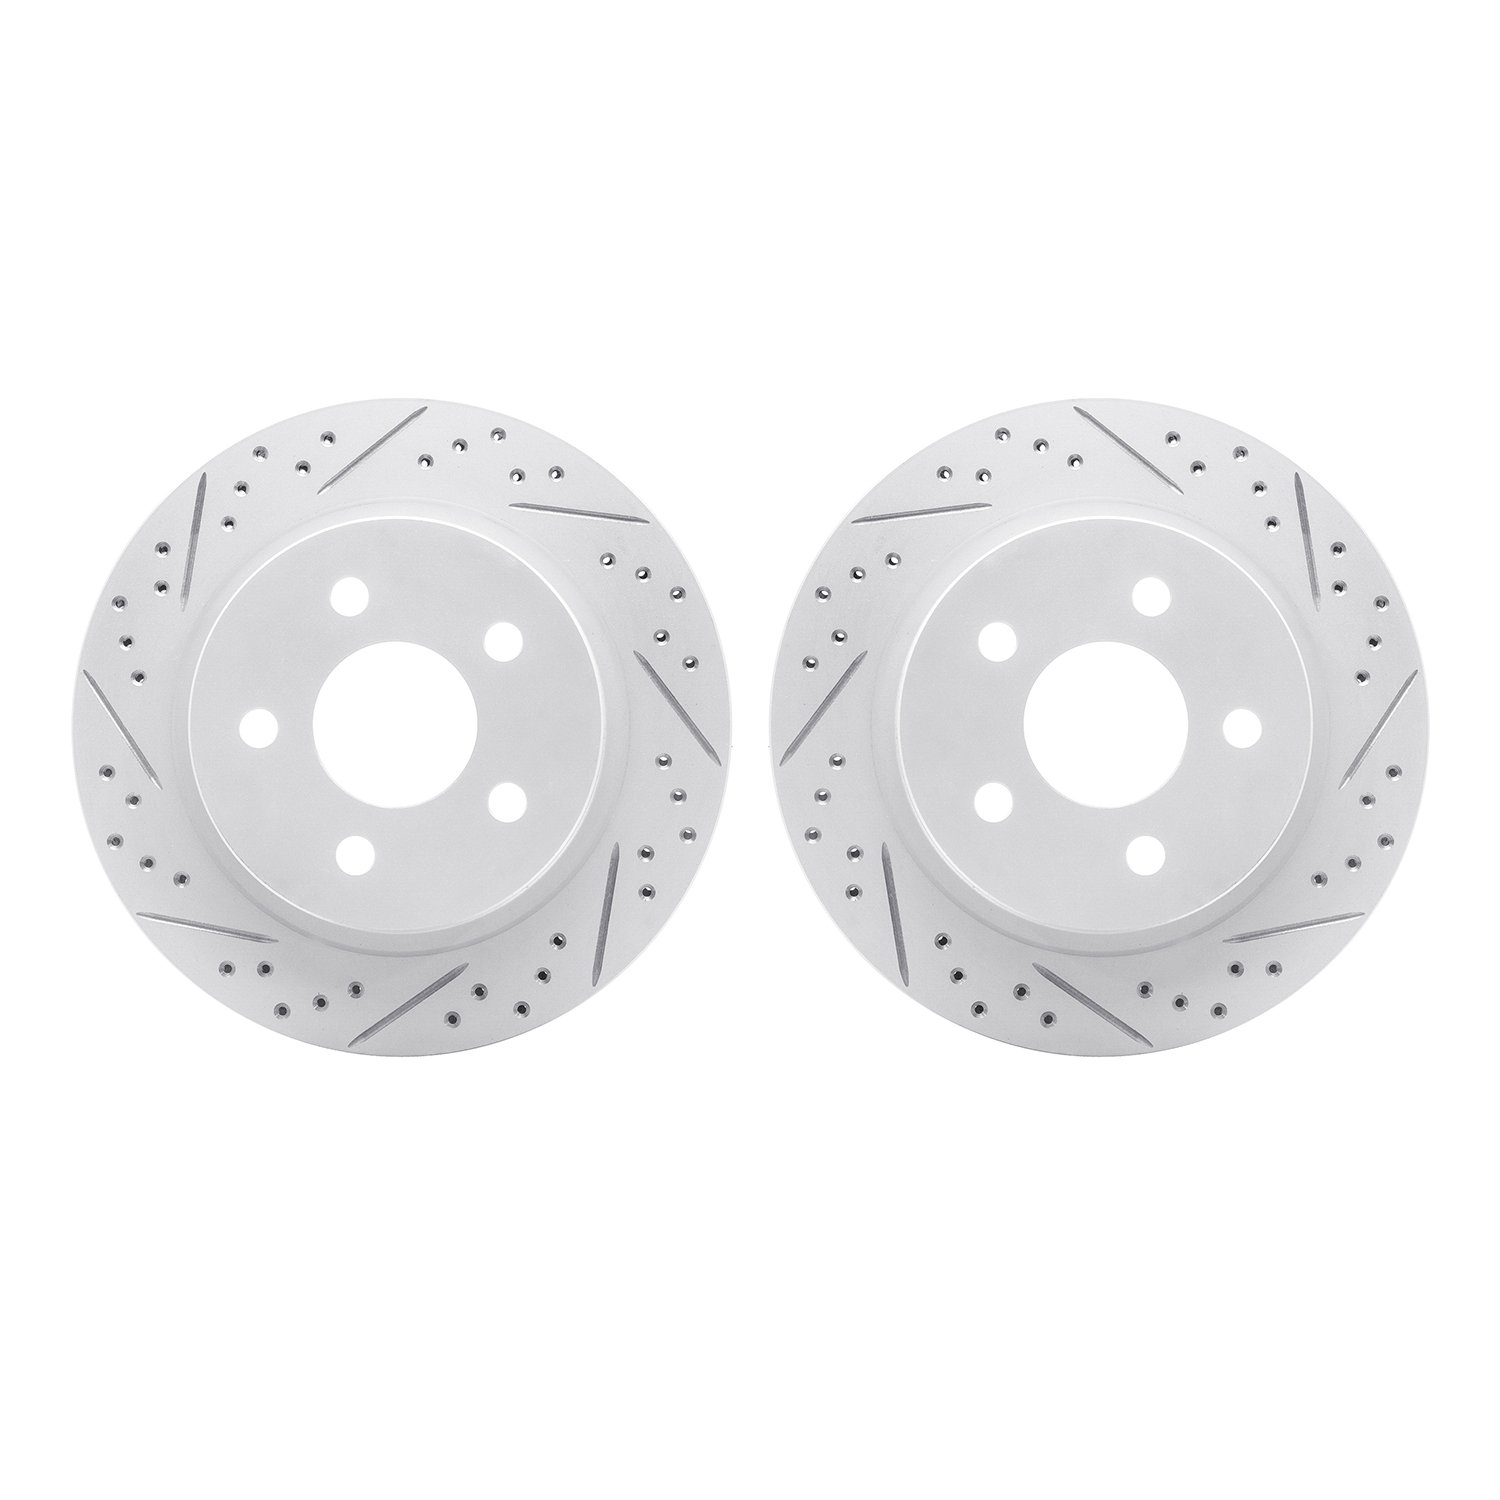 2002-47037 Geoperformance Drilled/Slotted Brake Rotors, 1993-1997 GM, Position: Rear